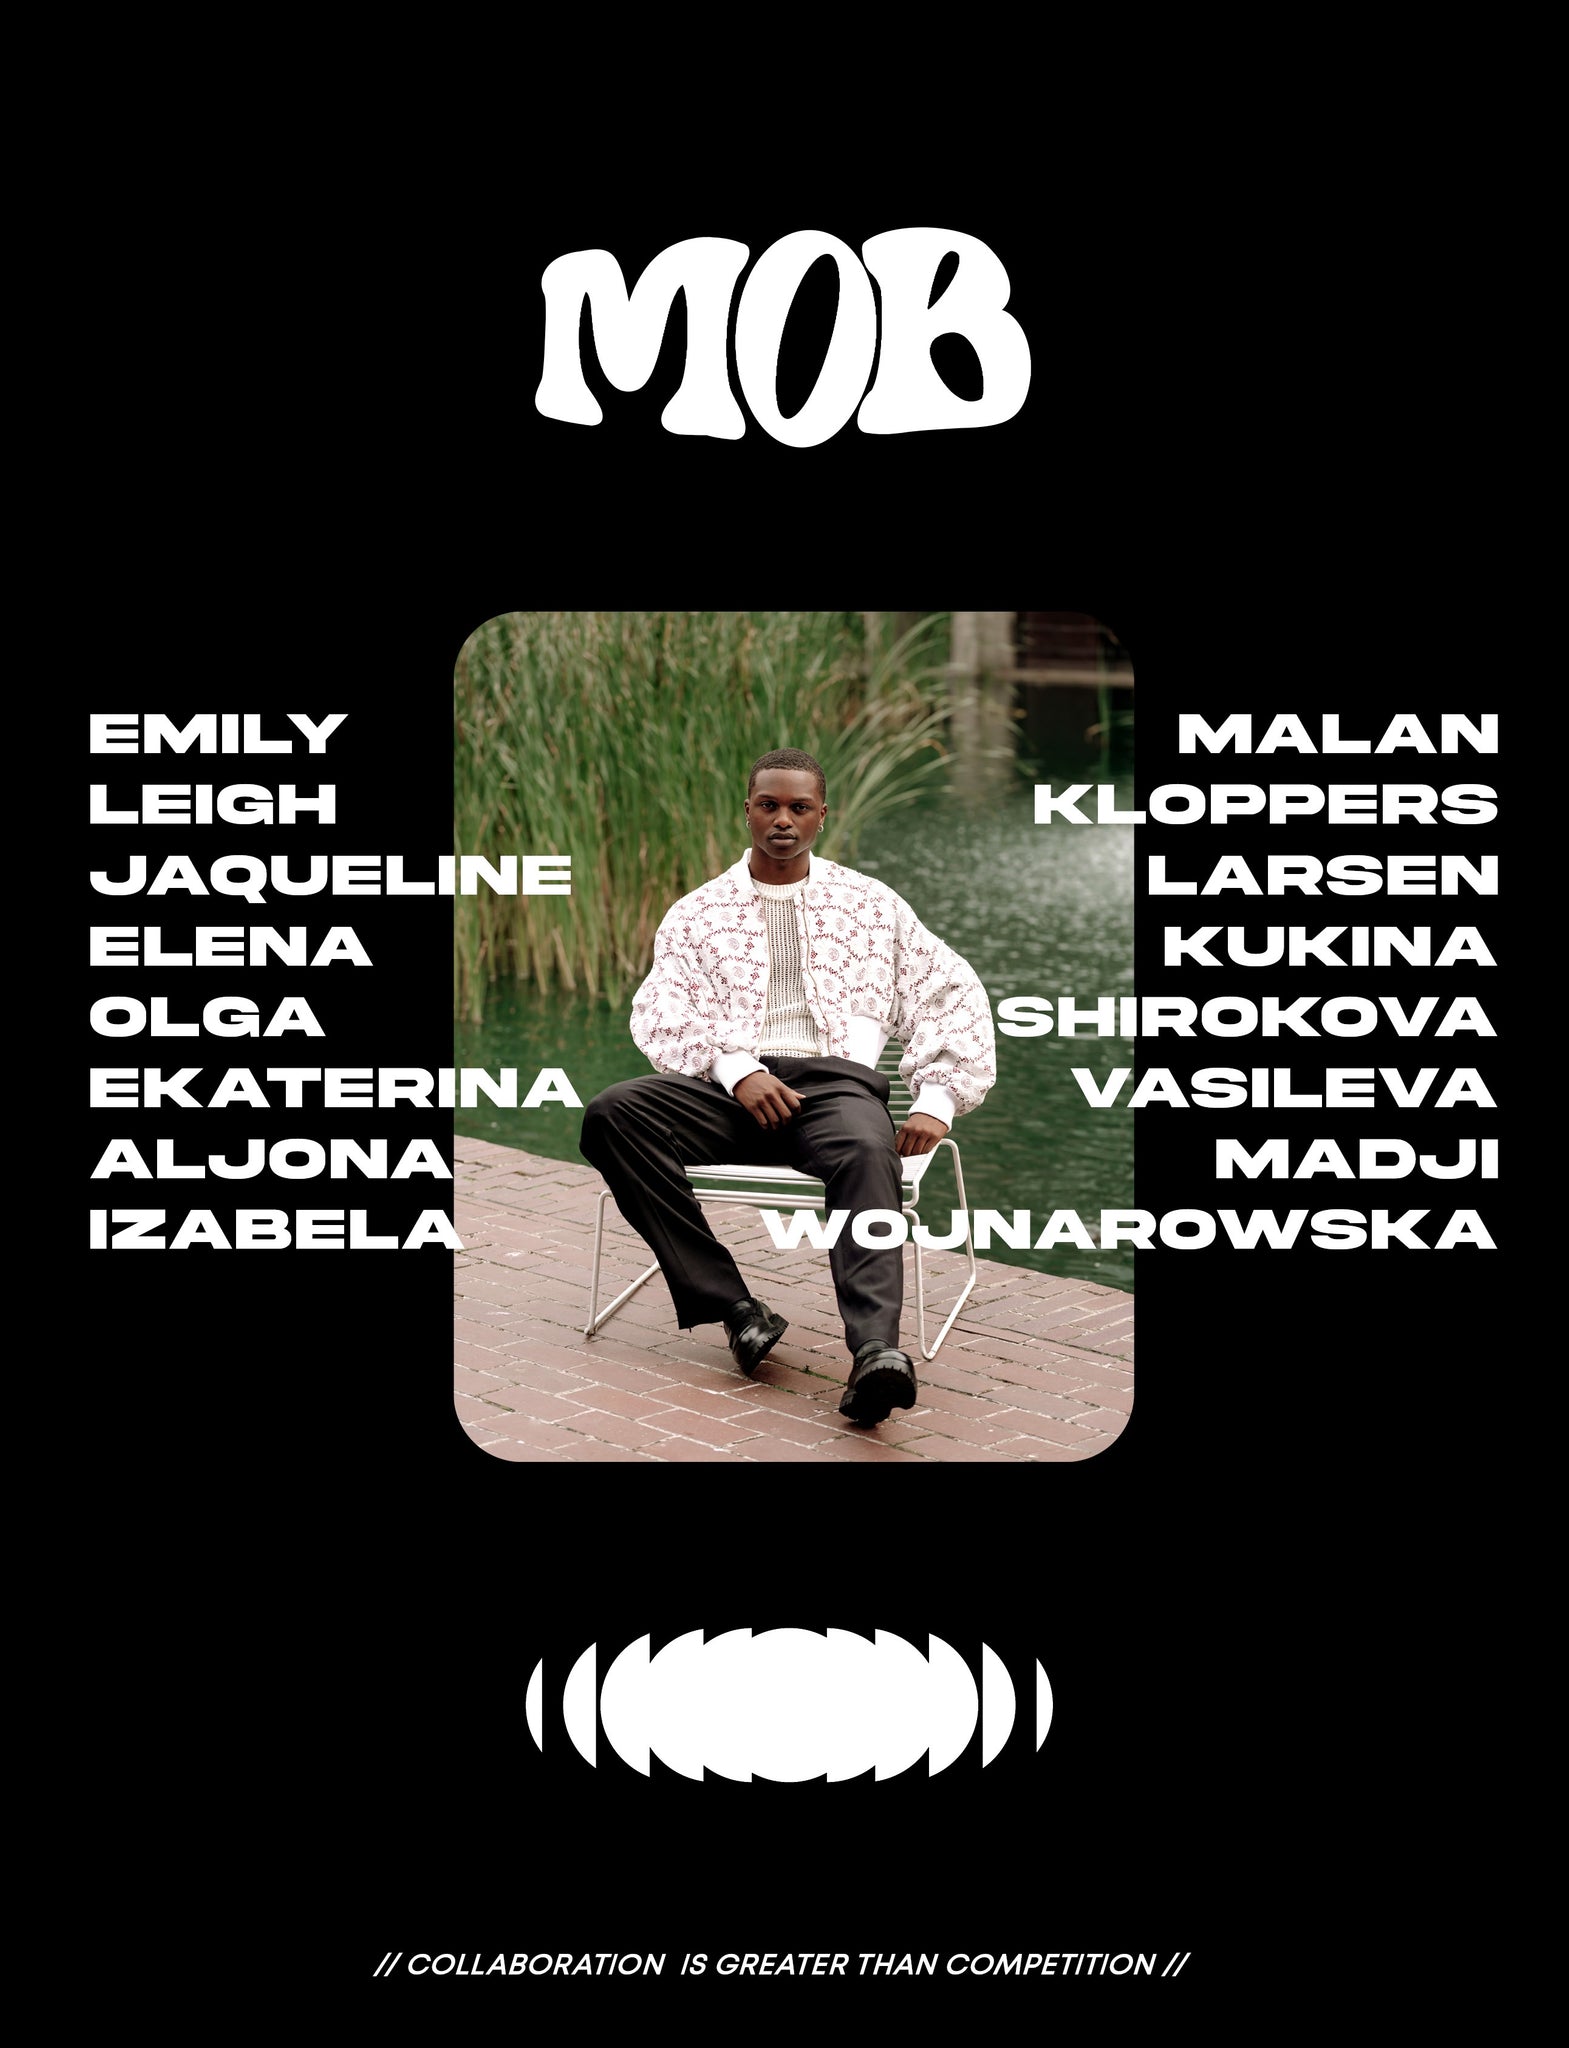 MOB JOURNAL | VOLUME THIRTY SIX | ISSUE #61